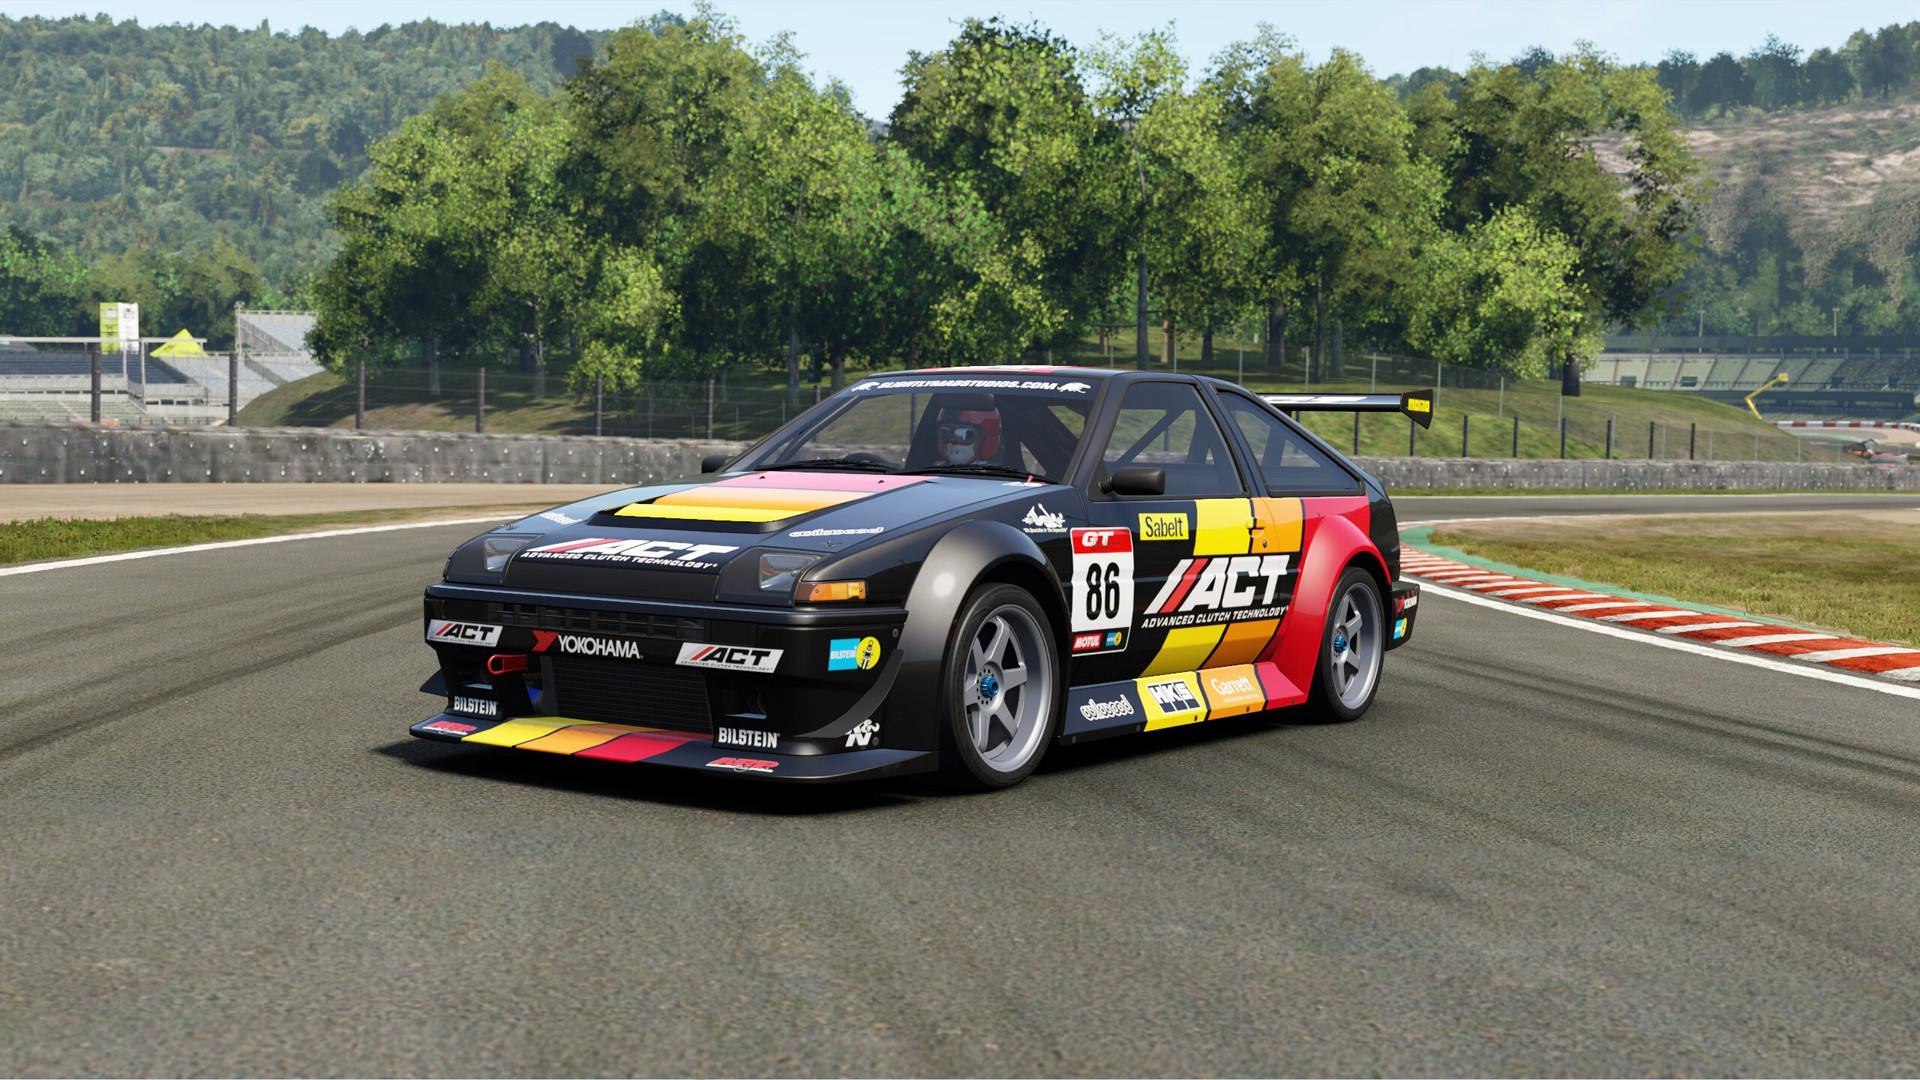 Buy Project CARS 3: Style Pack